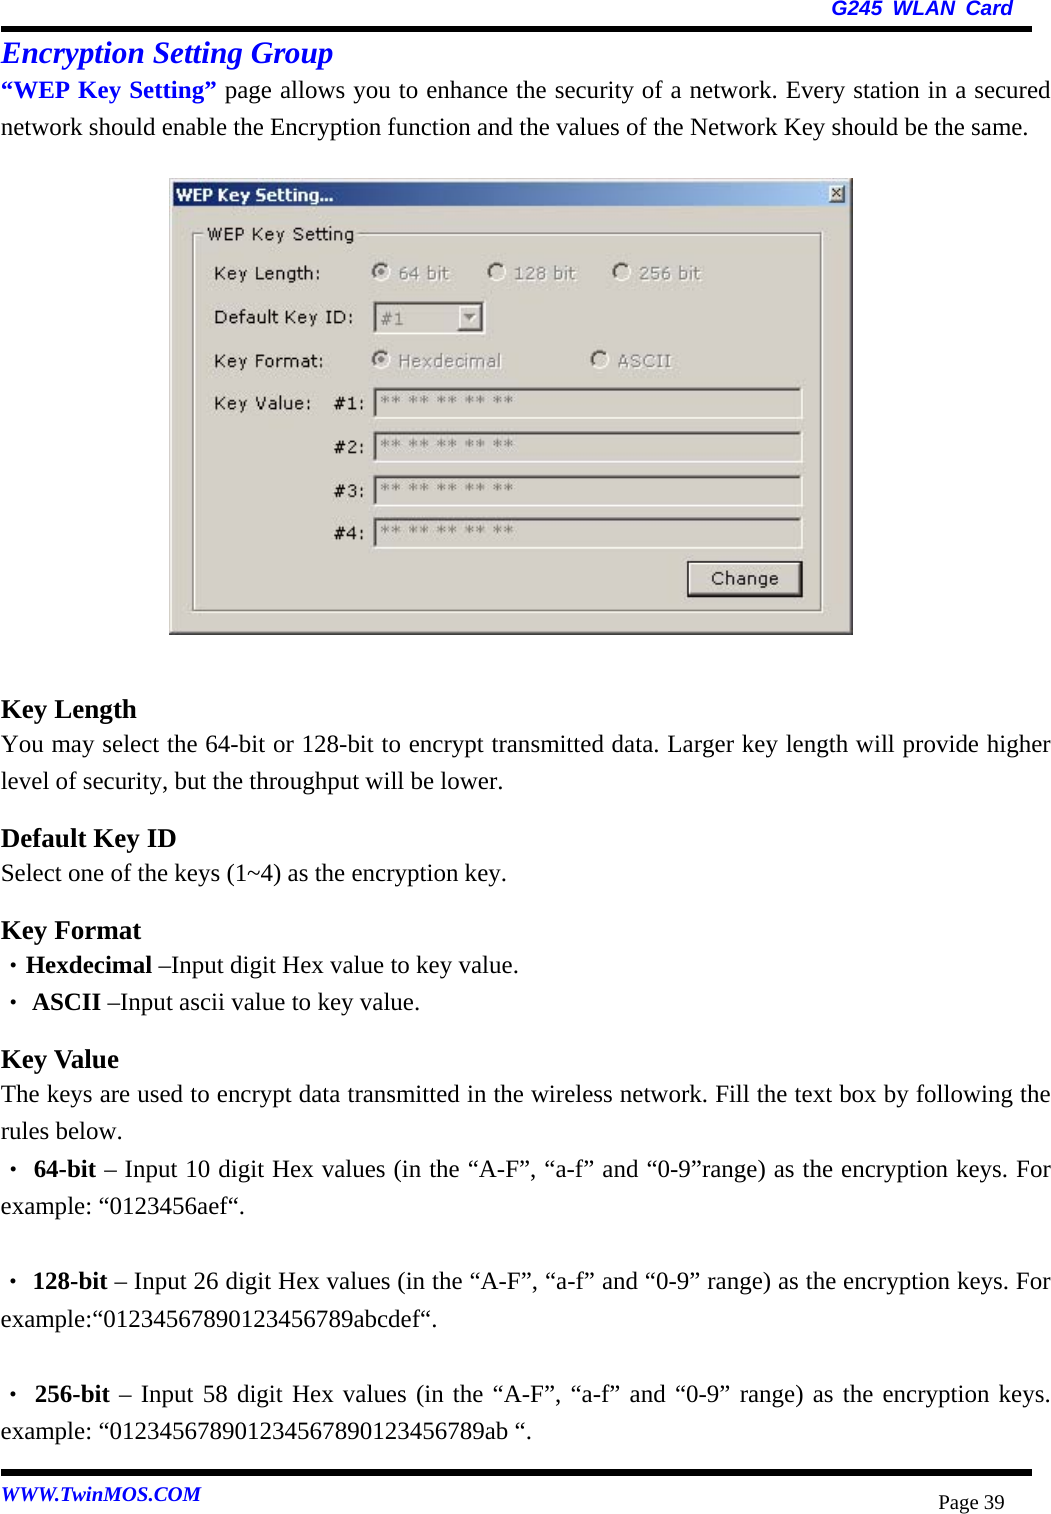   G245 WLAN Card WWW.TwinMOS.COM  Page 39Encryption Setting Group “WEP Key Setting” page allows you to enhance the security of a network. Every station in a secured network should enable the Encryption function and the values of the Network Key should be the same.               Key Length You may select the 64-bit or 128-bit to encrypt transmitted data. Larger key length will provide higher level of security, but the throughput will be lower. Default Key ID Select one of the keys (1~4) as the encryption key. Key Format ‧Hexdecimal –Input digit Hex value to key value.  ‧ASCII –Input ascii value to key value. Key Value The keys are used to encrypt data transmitted in the wireless network. Fill the text box by following the rules below.    ‧64-bit – Input 10 digit Hex values (in the “A-F”, “a-f” and “0-9”range) as the encryption keys. For example: “0123456aef“.   ‧128-bit – Input 26 digit Hex values (in the “A-F”, “a-f” and “0-9” range) as the encryption keys. For example:“01234567890123456789abcdef“.   ‧256-bit – Input 58 digit Hex values (in the “A-F”, “a-f” and “0-9” range) as the encryption keys. example: “012345678901234567890123456789ab “. 